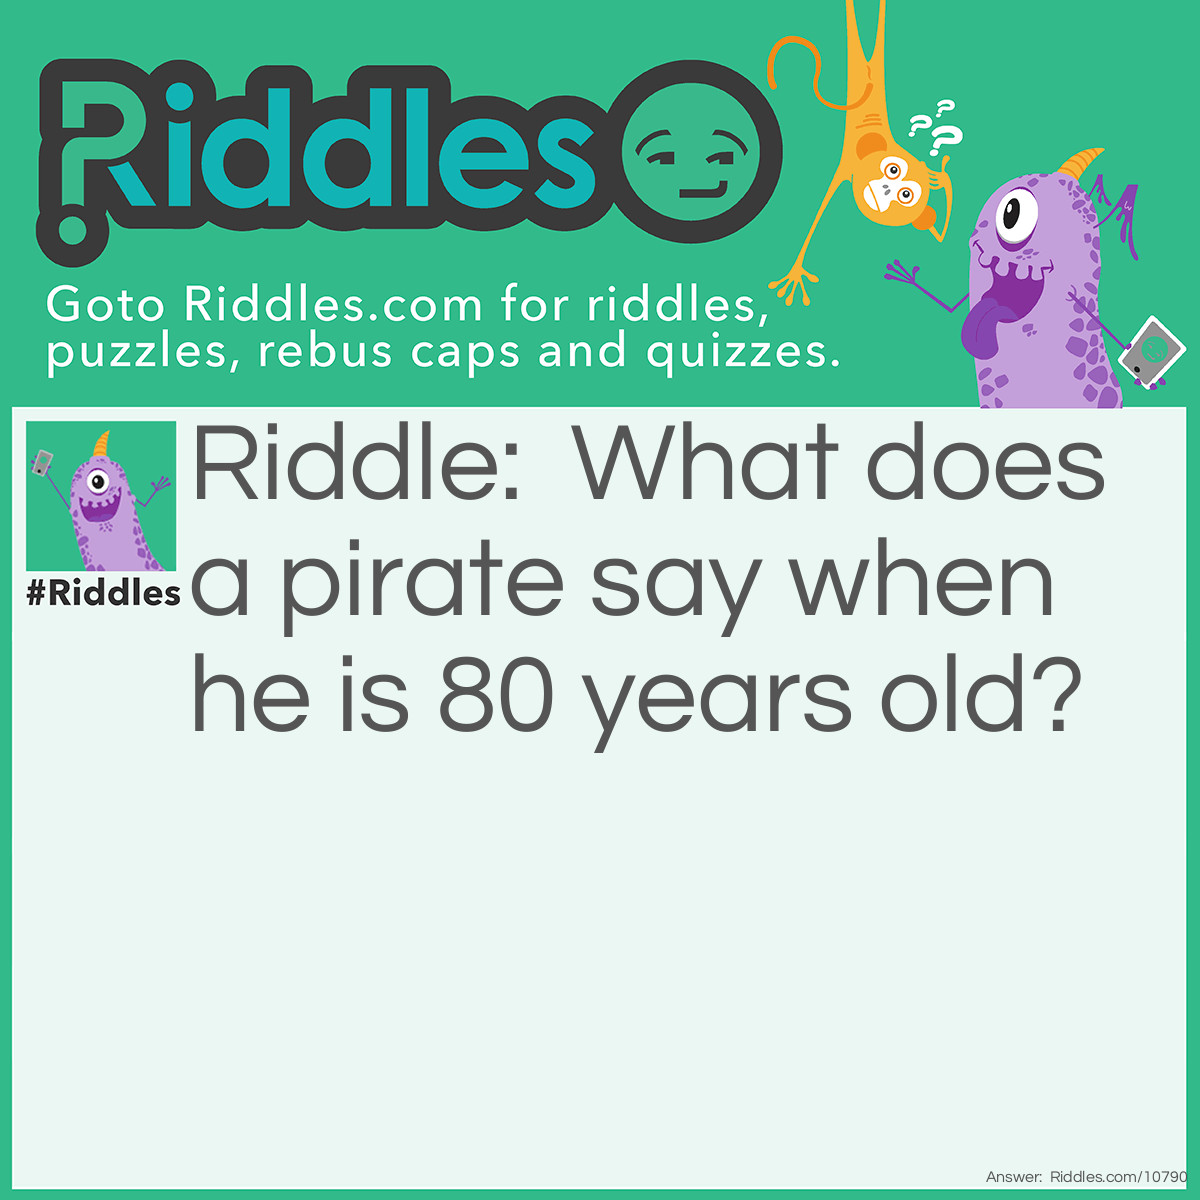 Riddle: What does a pirate say when he is 80 years old? Answer: Ayematey.